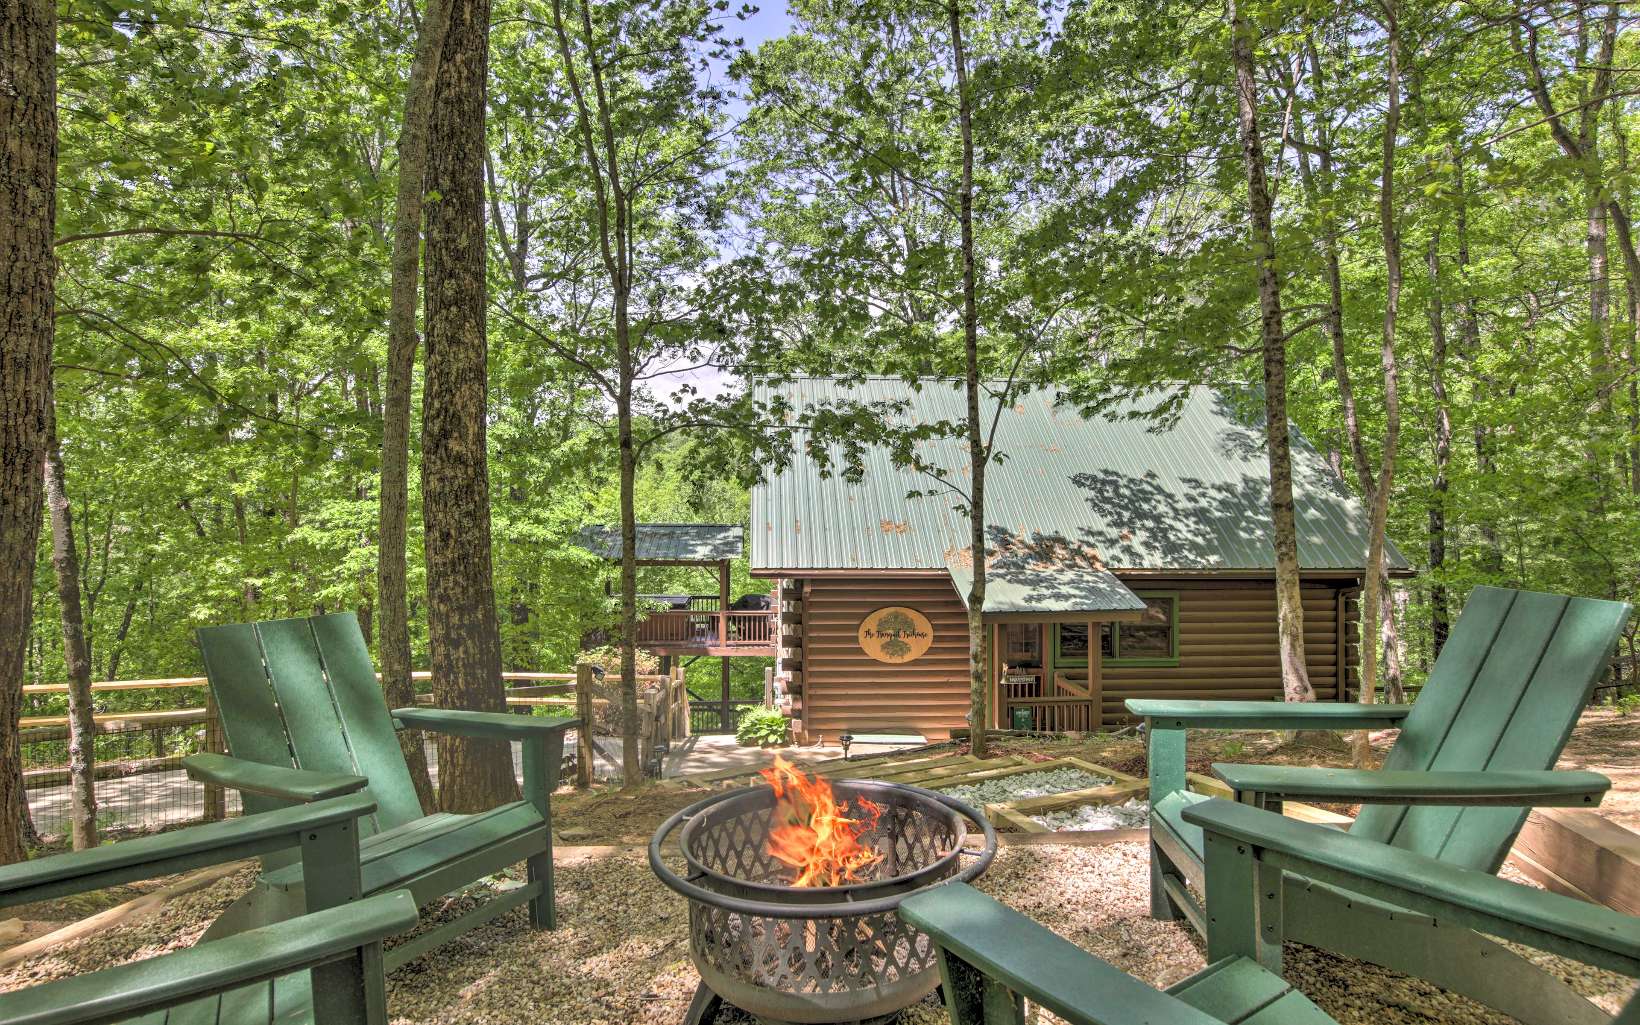 Picture-perfect fairytale cabin, nestled into the woods with end-of-the-road privacy and gorgeous sunset views. Just 5 miles to Downtown Blue Ridge! This is exactly what you want in a mountain cabin retreat...and then some! Perched on a ridge and surrounded by the lush Chattahoochee National Forest, you truly feel like you are living in a treehouse here. The cabin is located in the enchanting Cherry Lake community of Cherry Log, Ga. (between Blue Ridge and Ellijay) From the moment you enter the neighborhood, you will be transported into a magical and serene mountain paradise, surrounded by lush forest, tranquil streams, and abundant wildlife. The famous Benton MacKaye trail runs through the neighborhood...you can literally hike right out the front door of our cabin. Other features include numerous lakes and streams, stunning mountain views and an adorable lakeside.